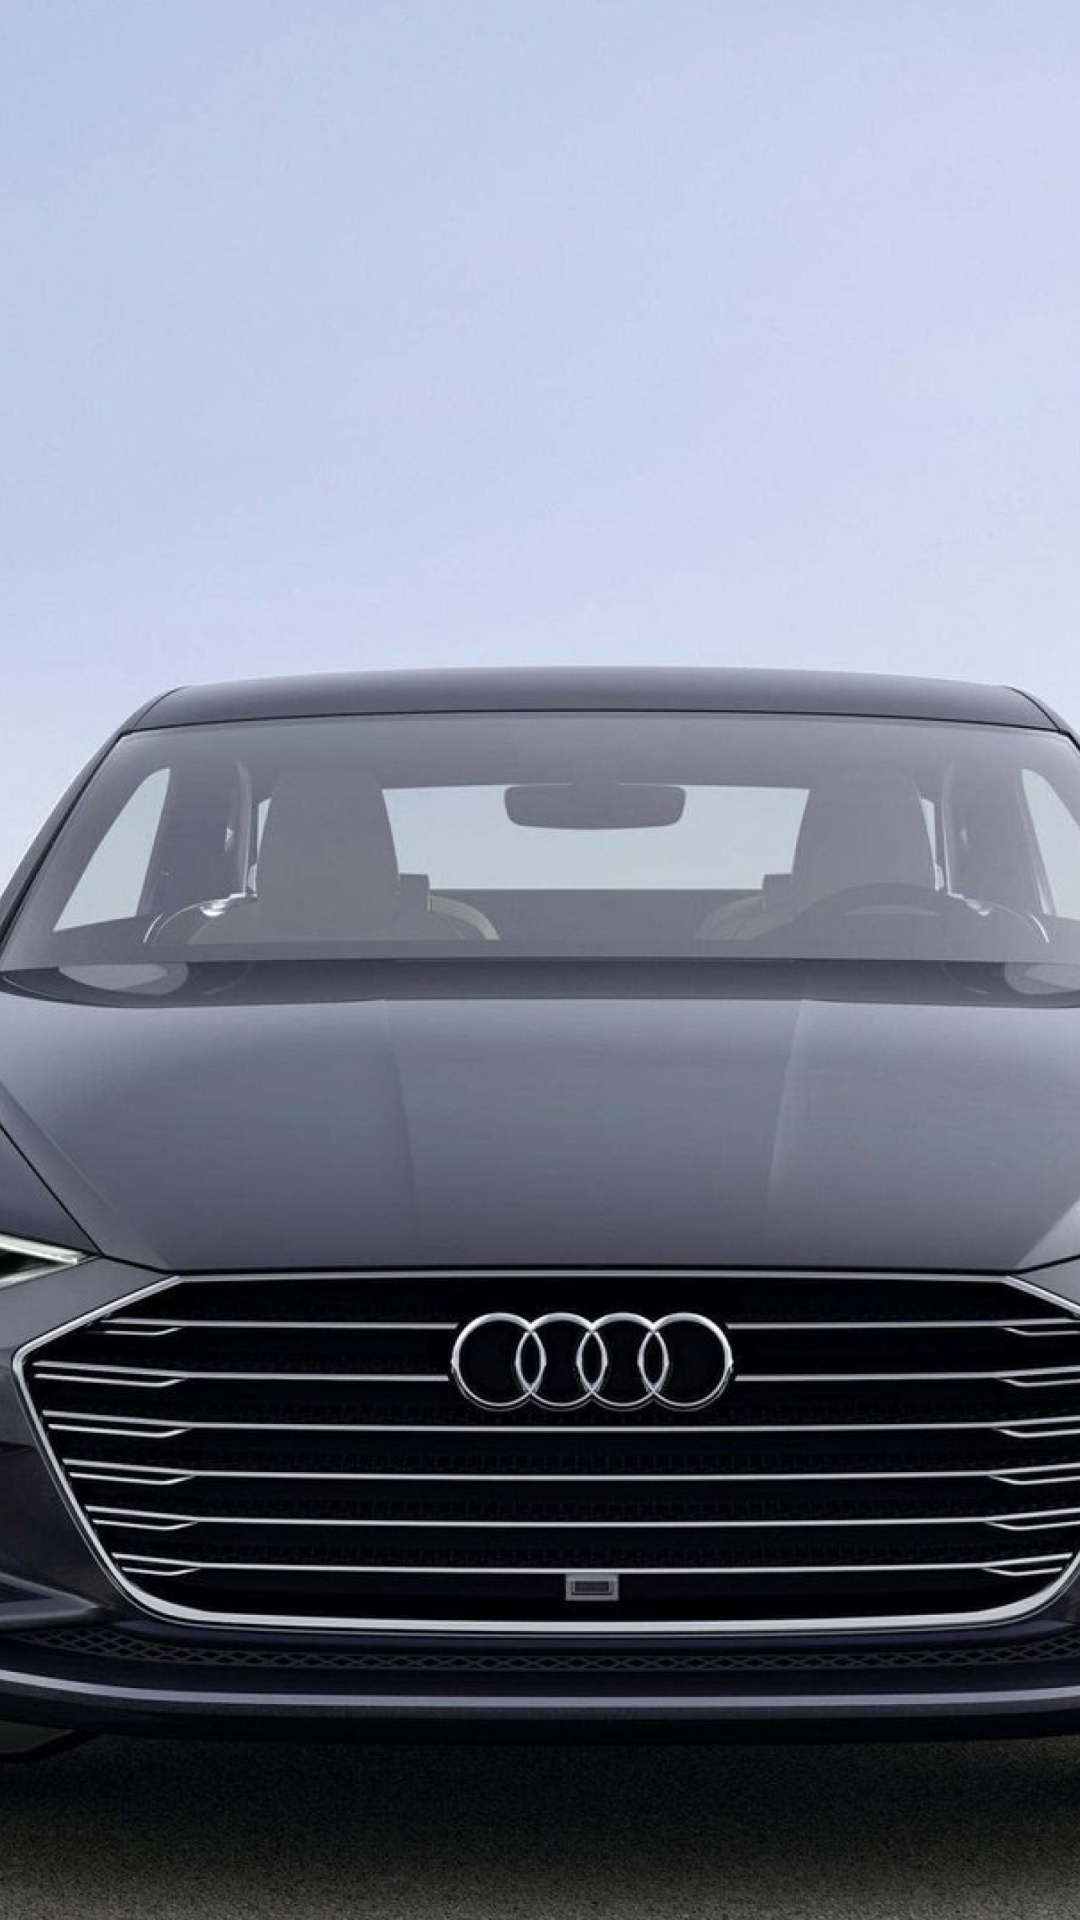 Audi A8 Wallpaper for iPhone 6 Plus